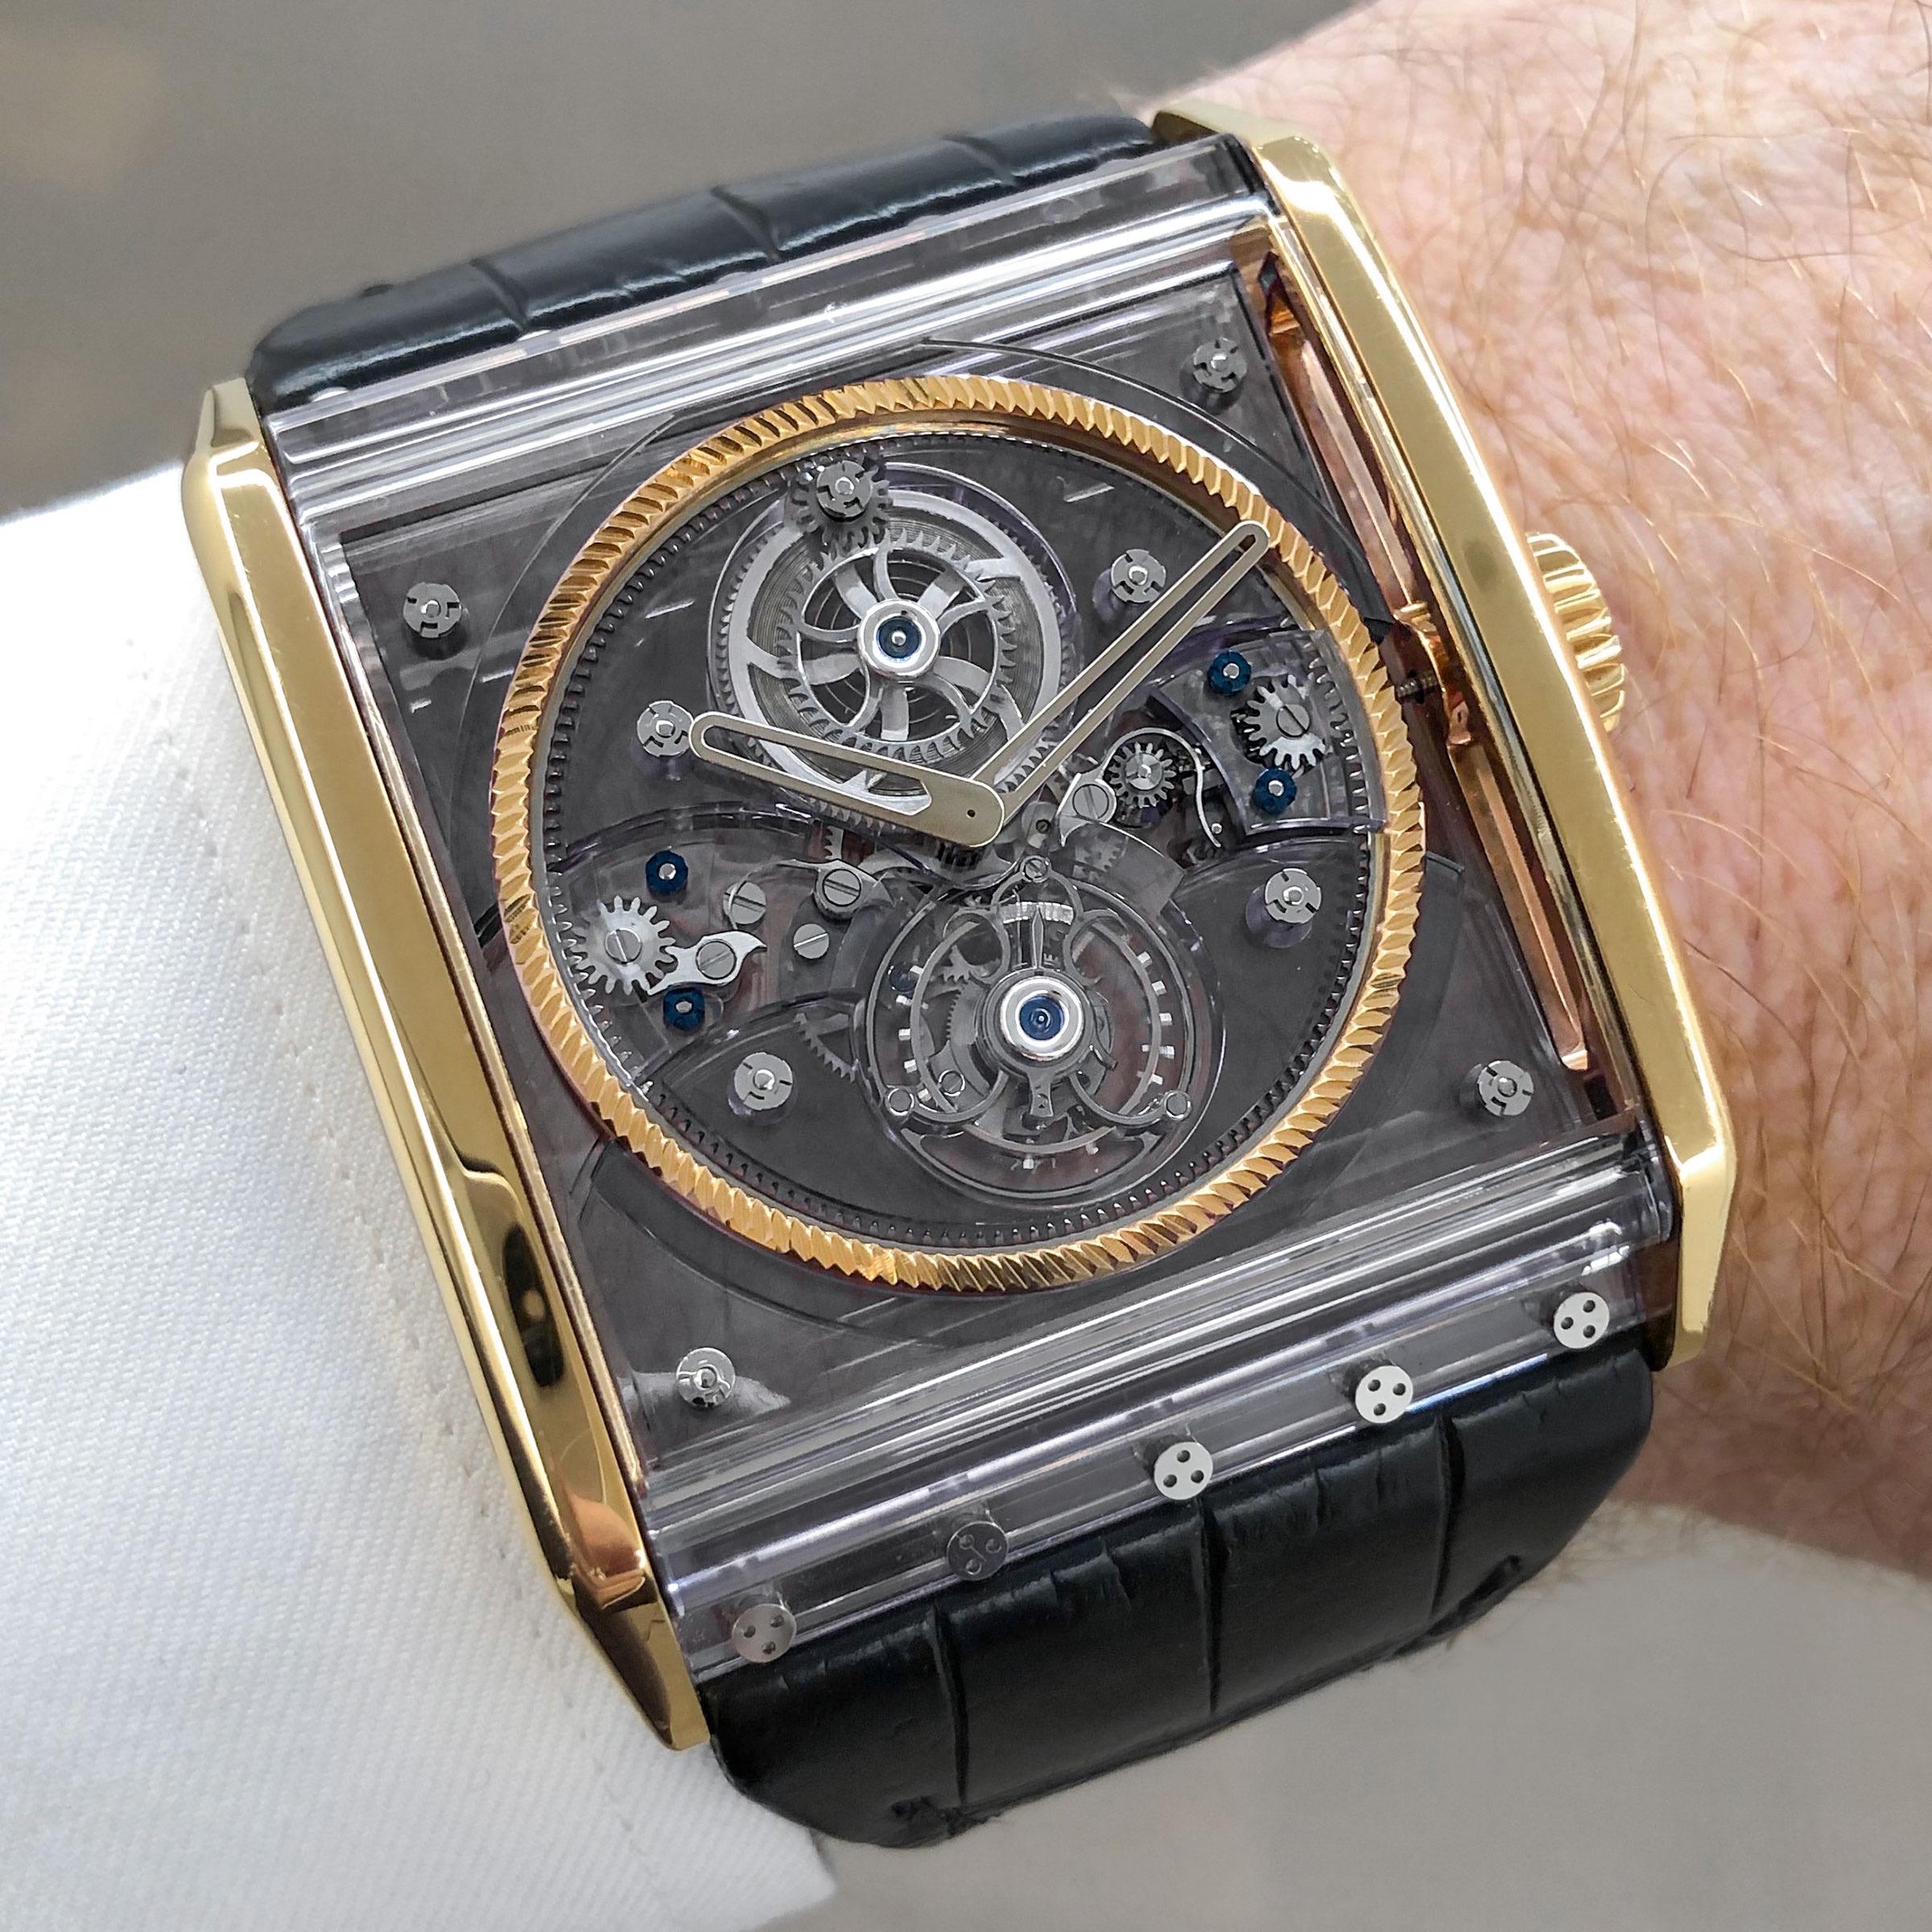 18 Karat Rose Gold Tourbillon Zephyr
Reference # RGGS-01-AAA
Skeletonized with Tourbillon
Christophe Claret developed movement
Manual Wind
White Sapphire Case with Rose Gold Sides
45 mm
Water Resistant to 30 meters
Limited Edition
Black Crocodile